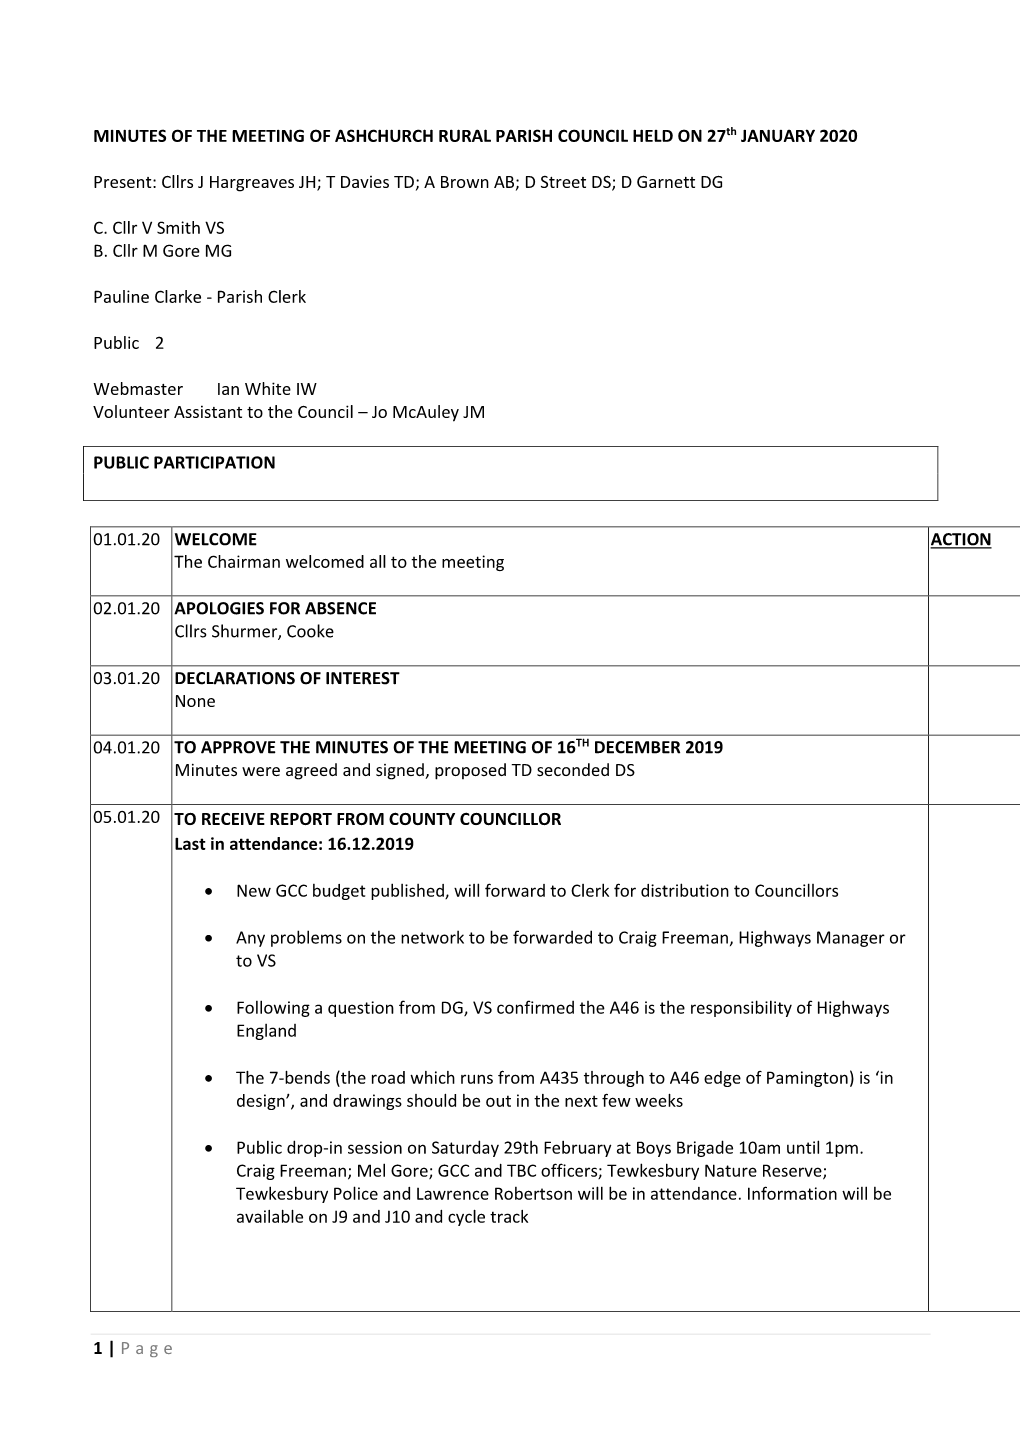 1 | Page MINUTES of the MEETING of ASHCHURCH RURAL PARISH COUNCIL HELD on 27Th JANUARY 2020 Present: Cllrs J Hargreaves JH; T Da